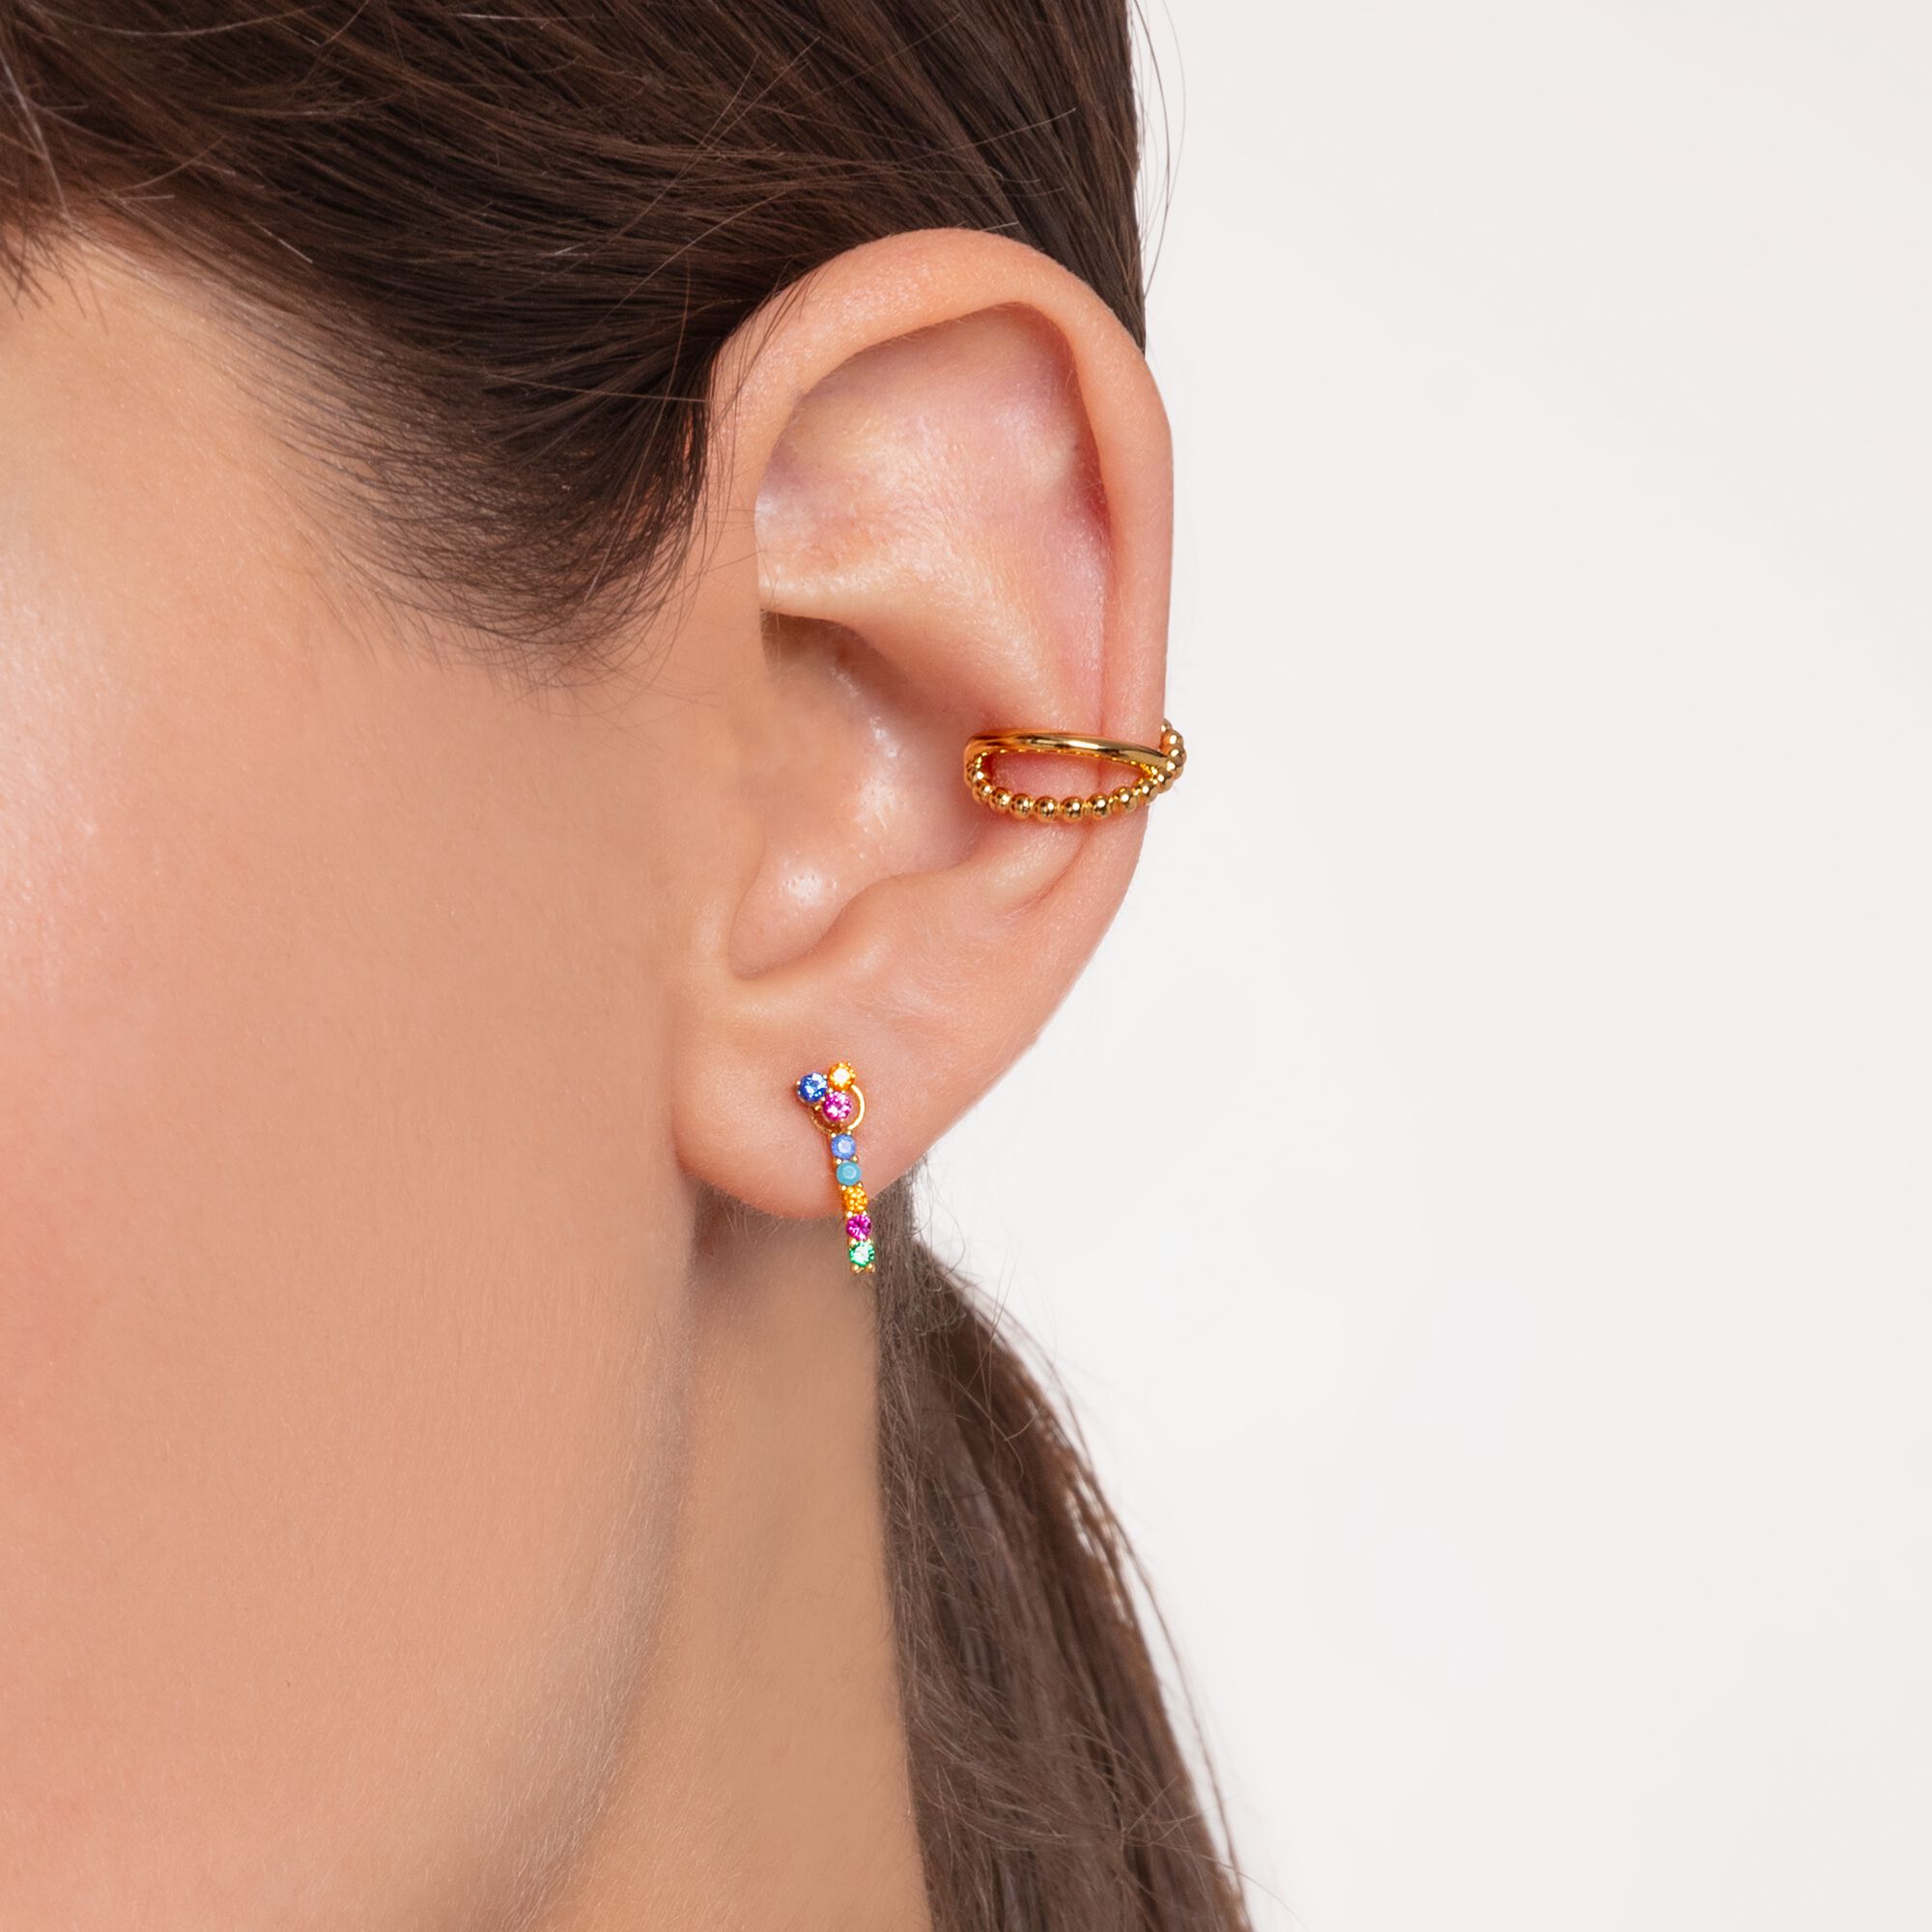 Ear cuff: Piercing-style SABO THOMAS in gold optic with